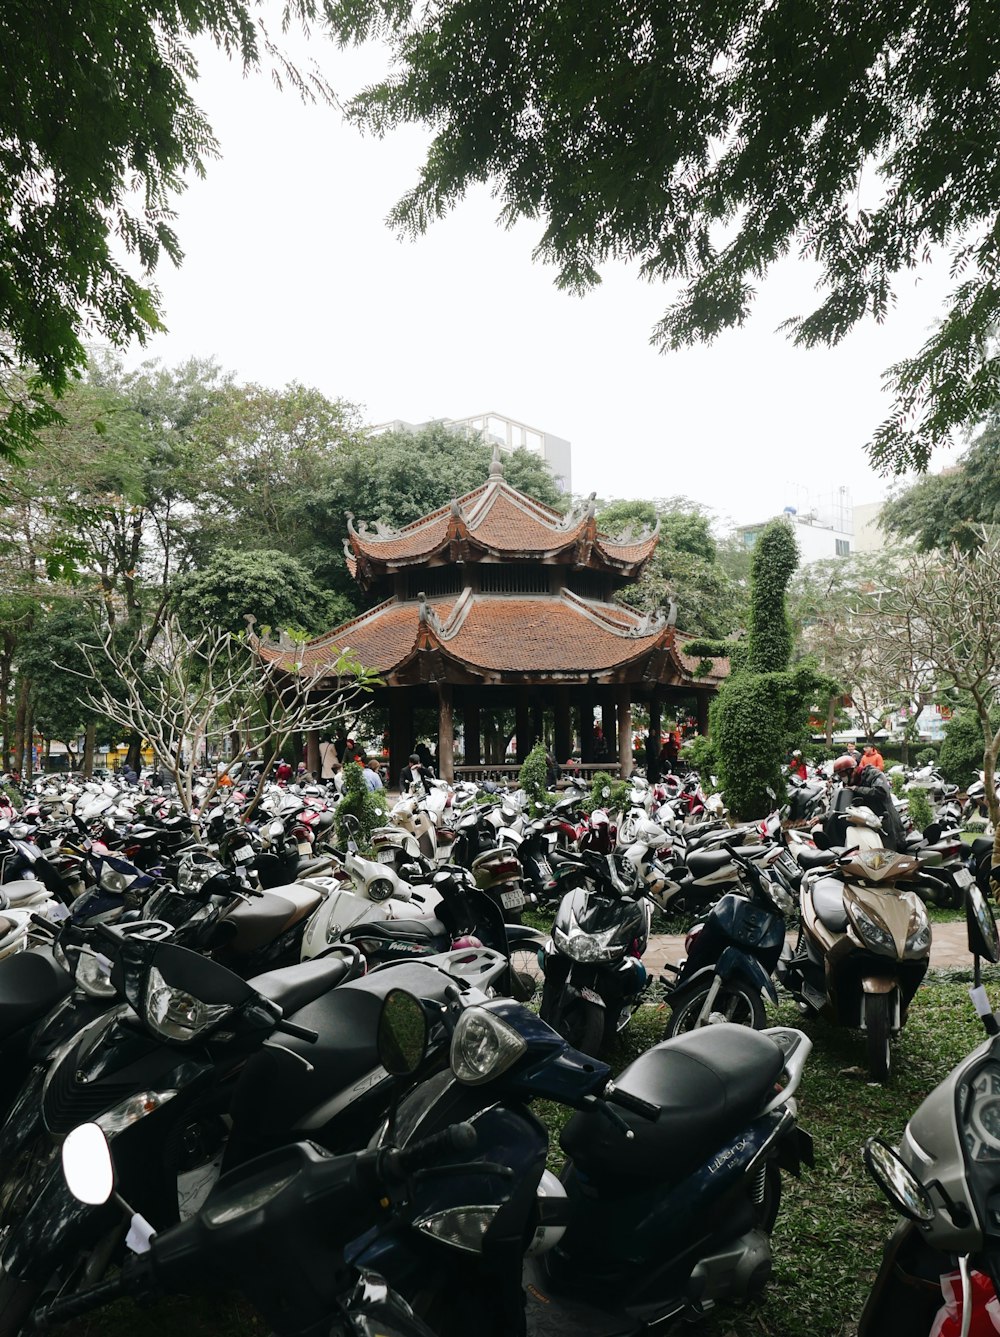 a large group of motorcycles parked in front of a building